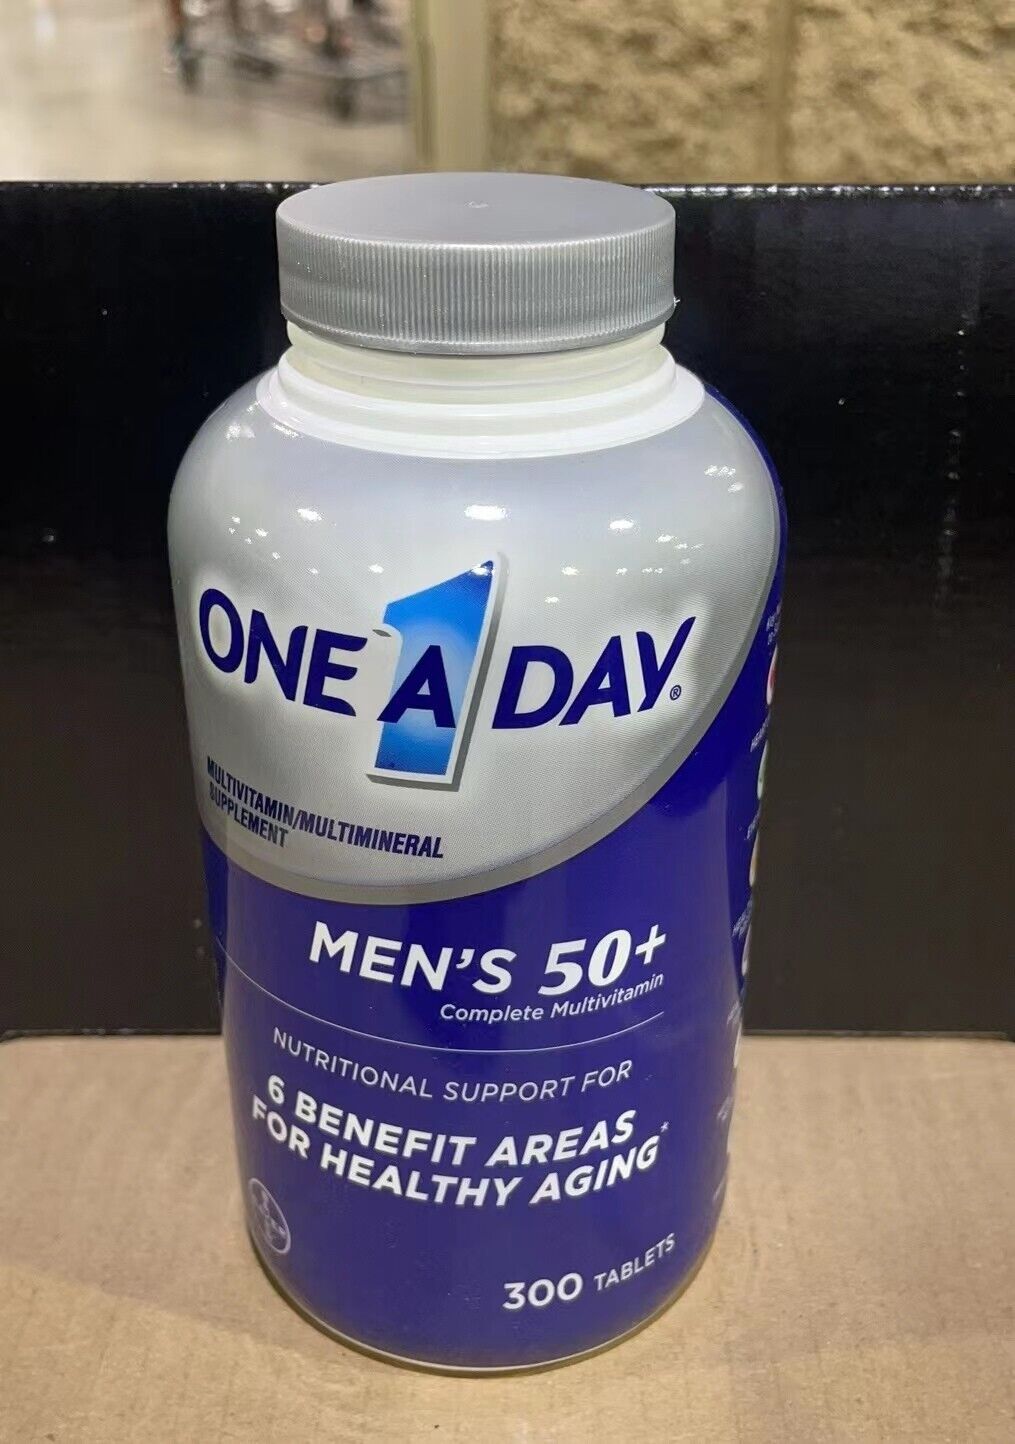 Bayer One A Day Men's 50+ Complete Multivitamin 300 Tablets